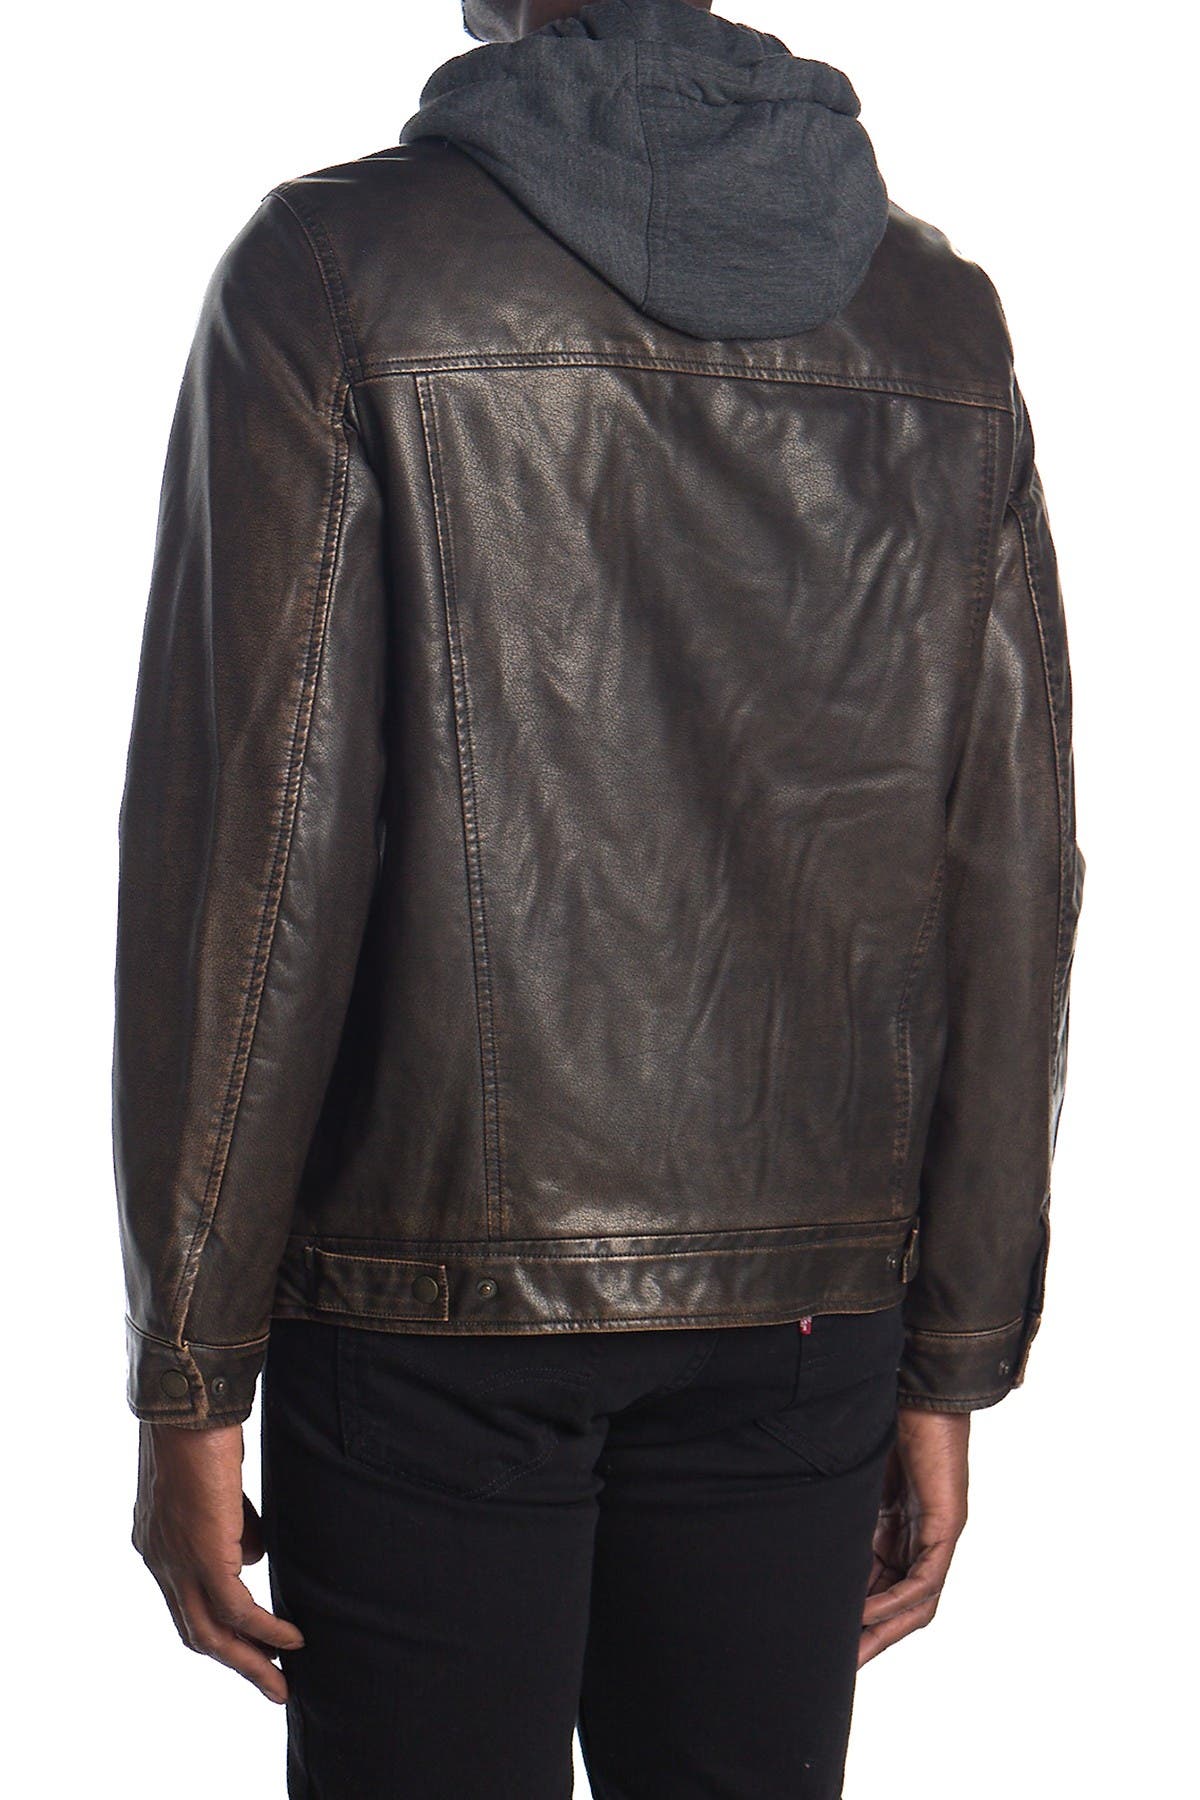 levi's faux leather hooded jacket